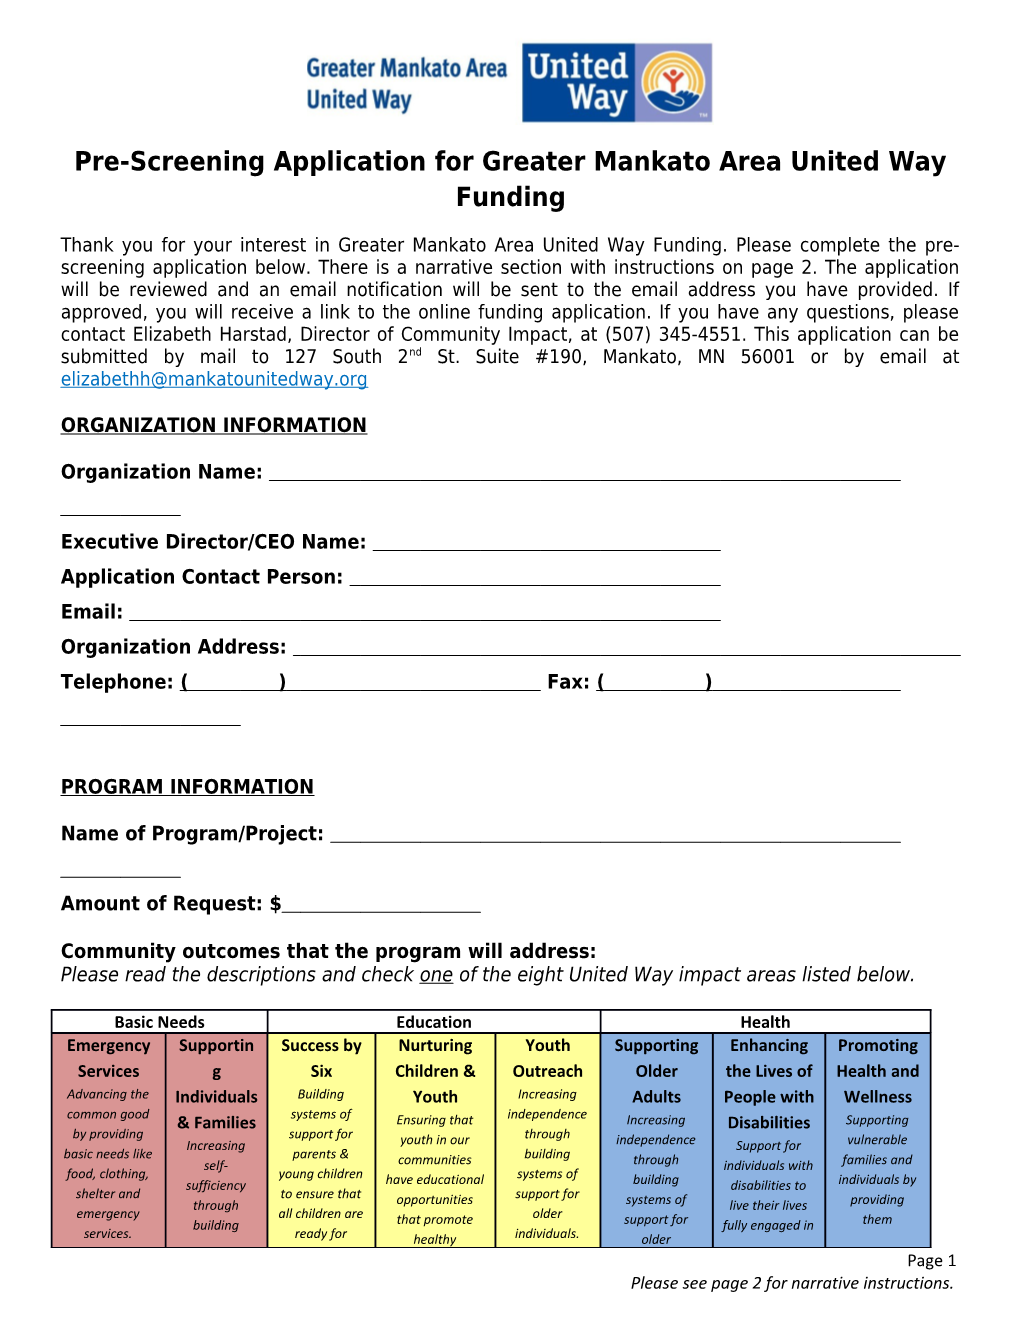 Pre-Screening Application for Greater Mankato Area United Way Funding